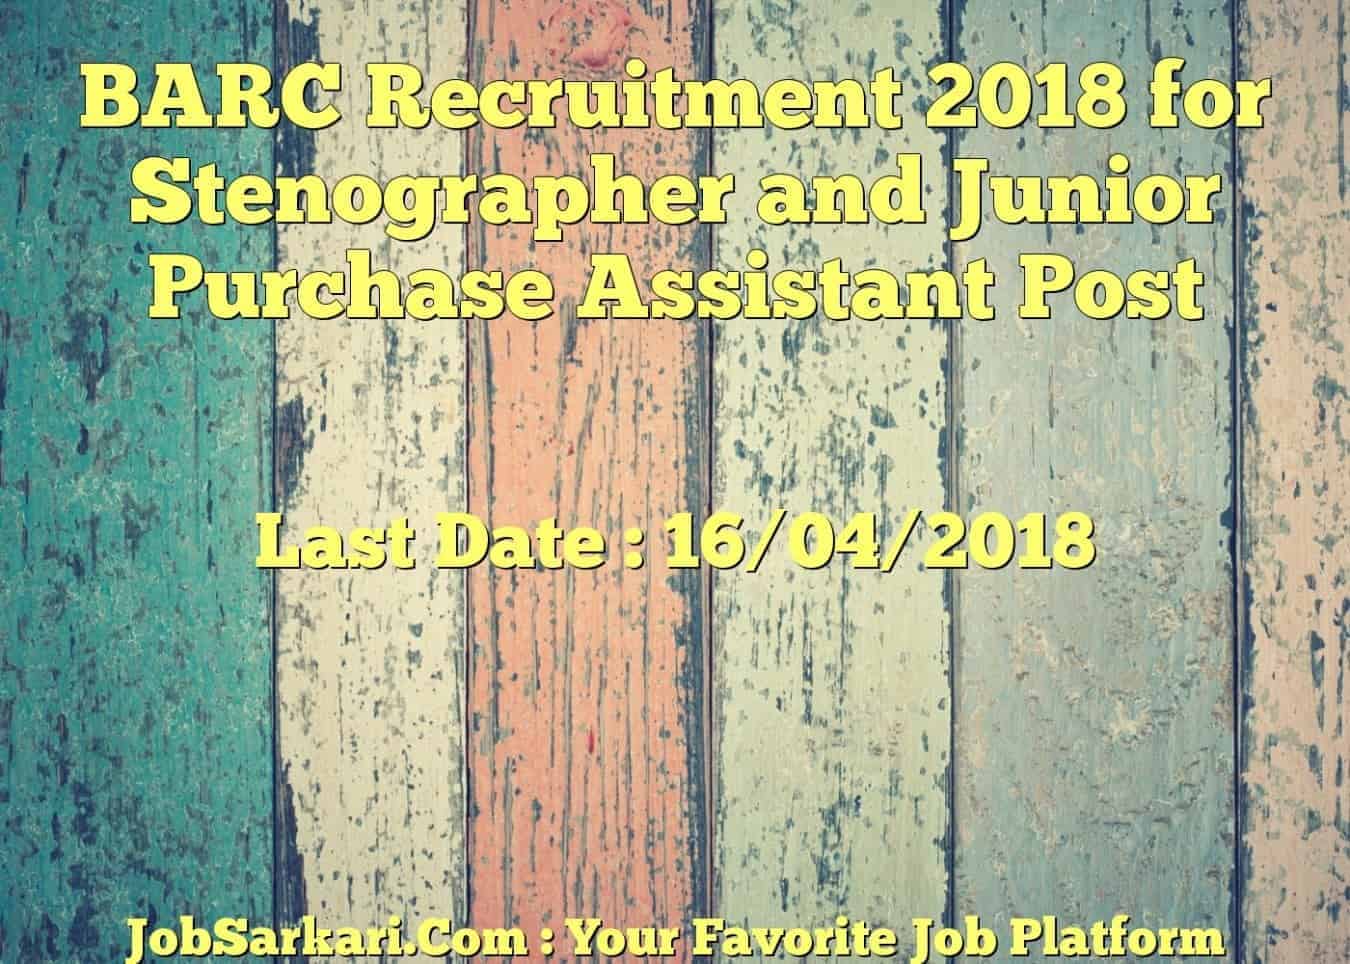 BARC Recruitment 2018 for Stenographer and Junior Purchase Assistant Post